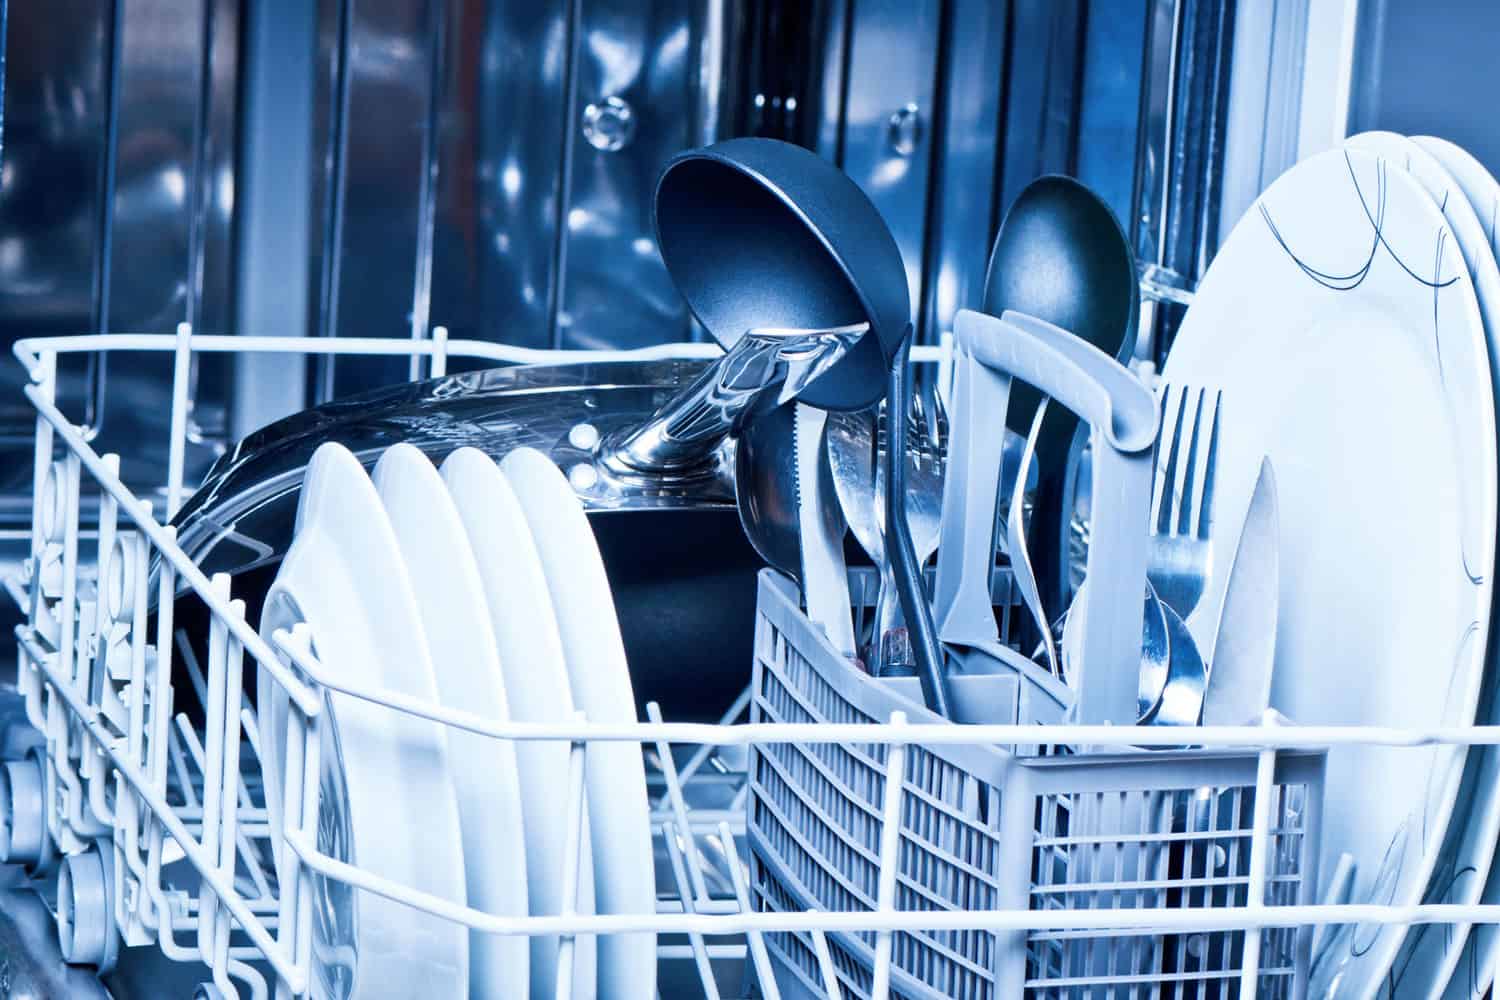 A close up photo of a dishwasher